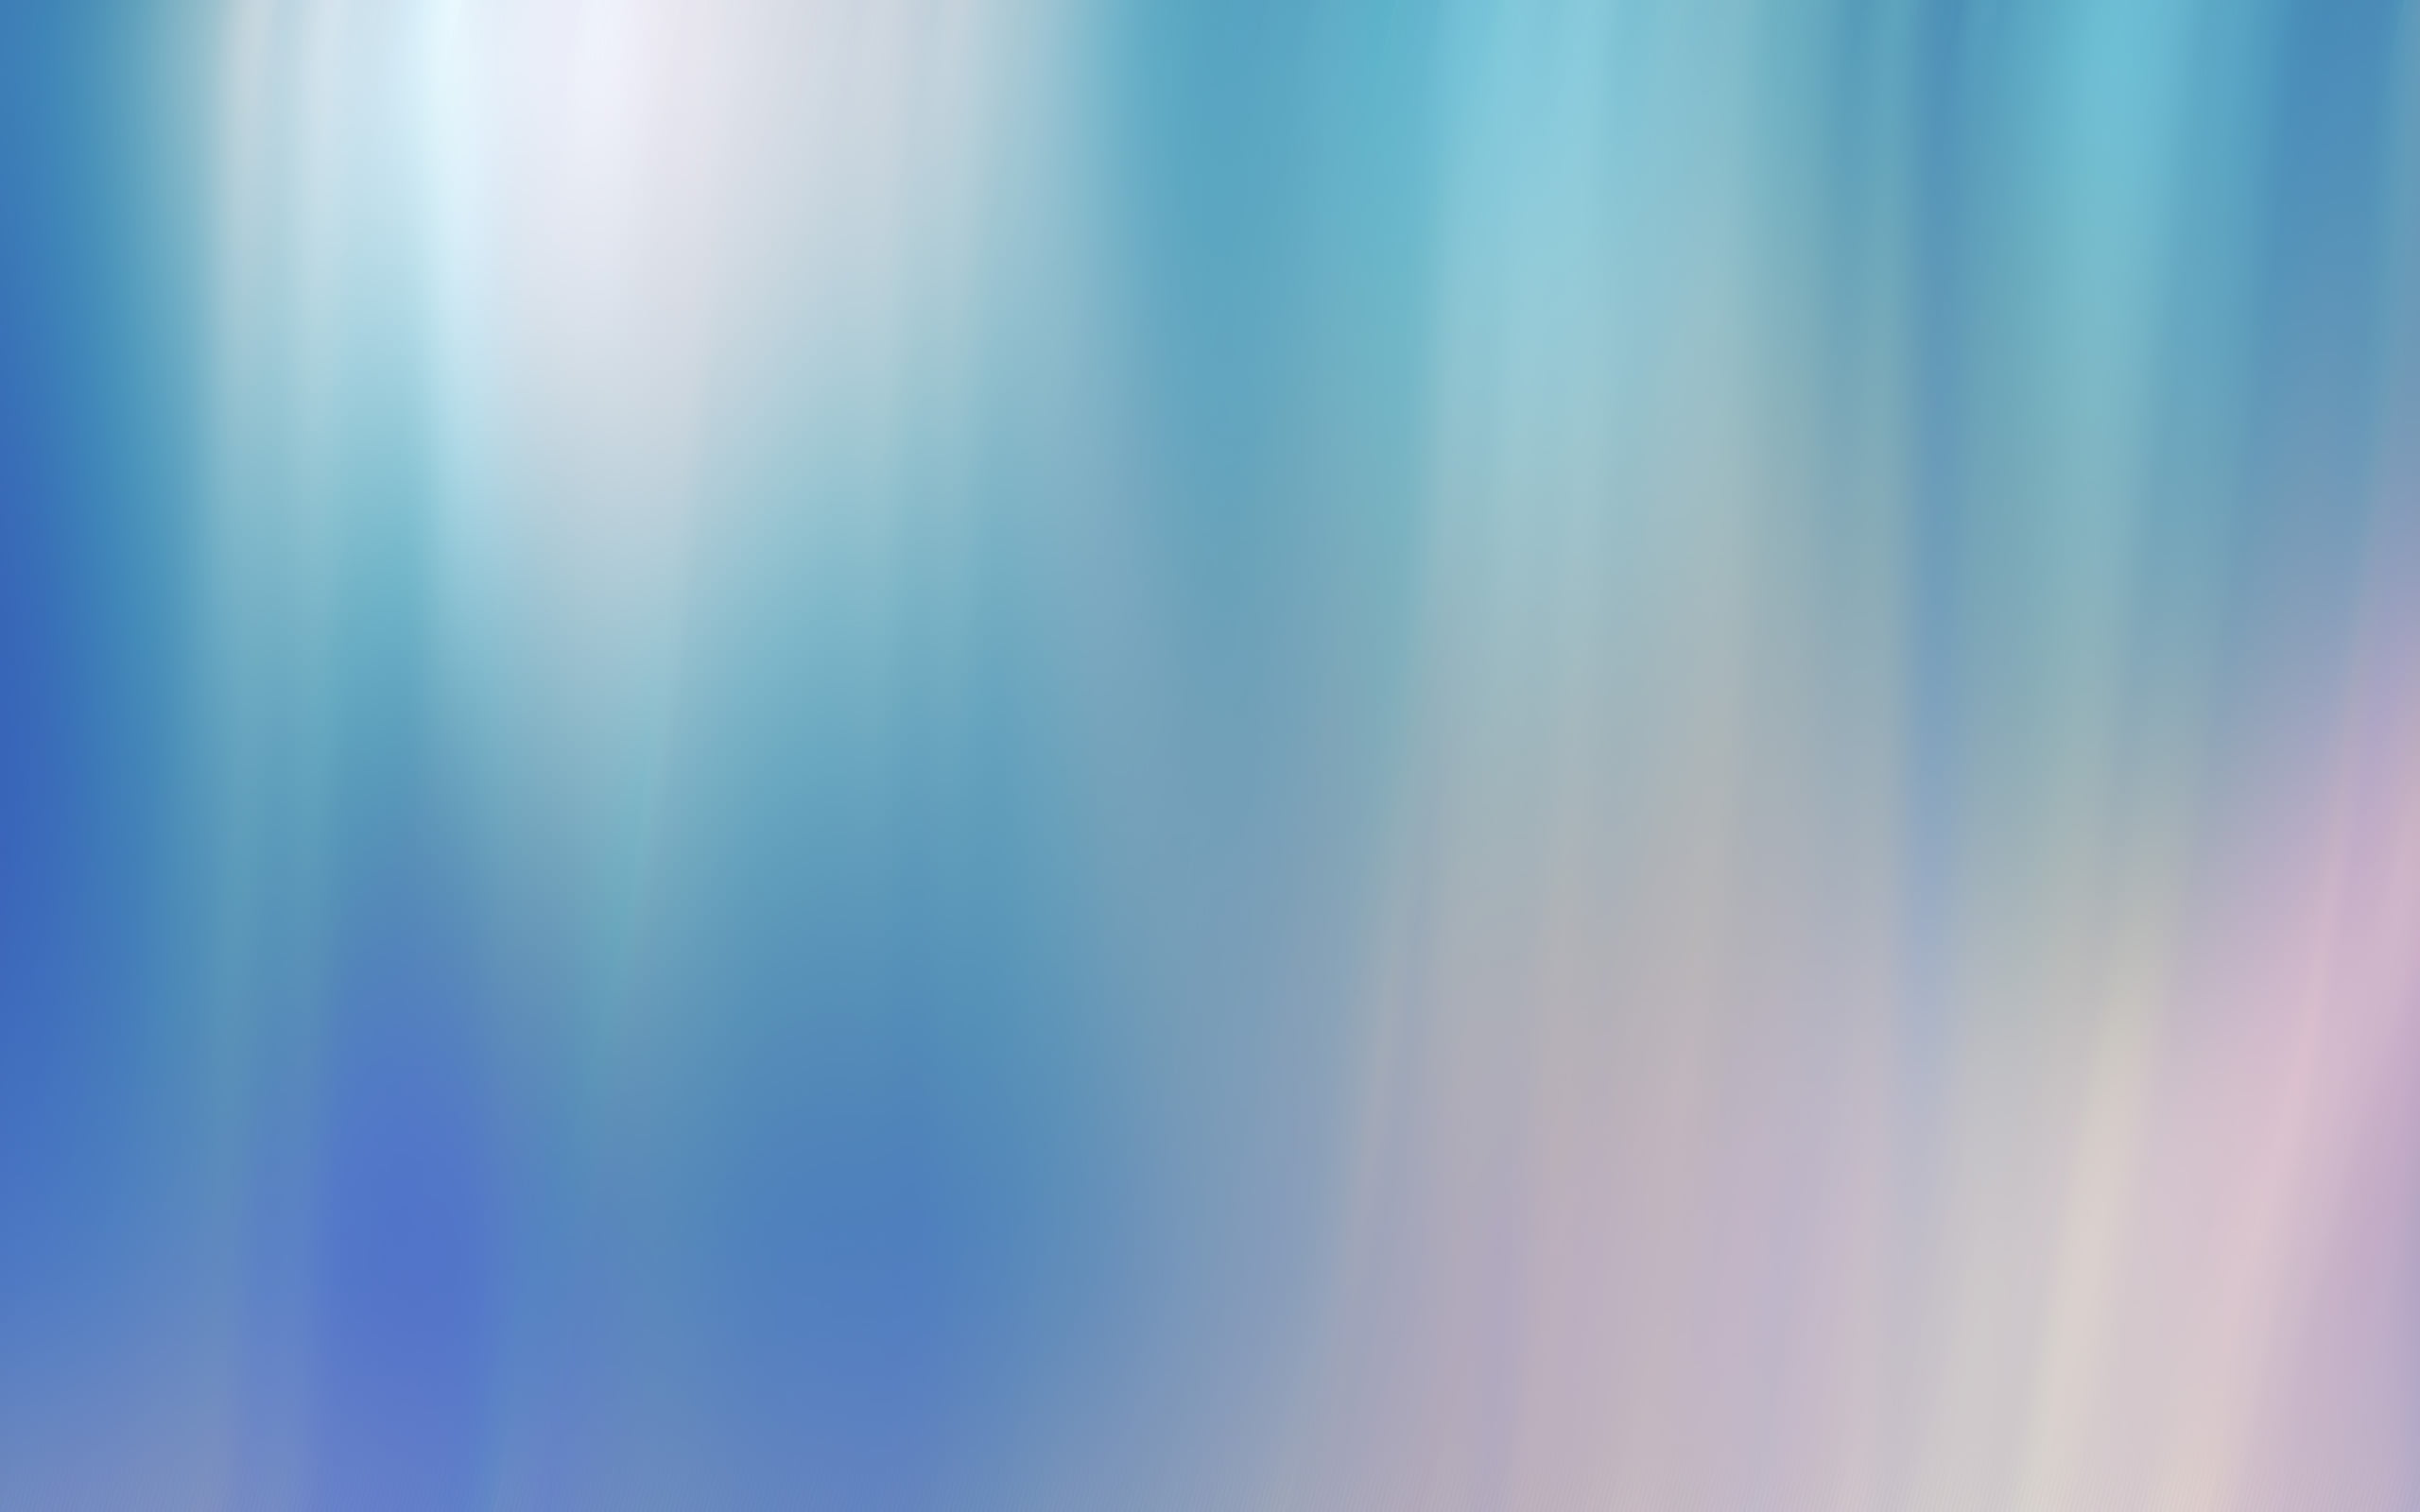 blue, pink, and teal abstract graphic wallpaper